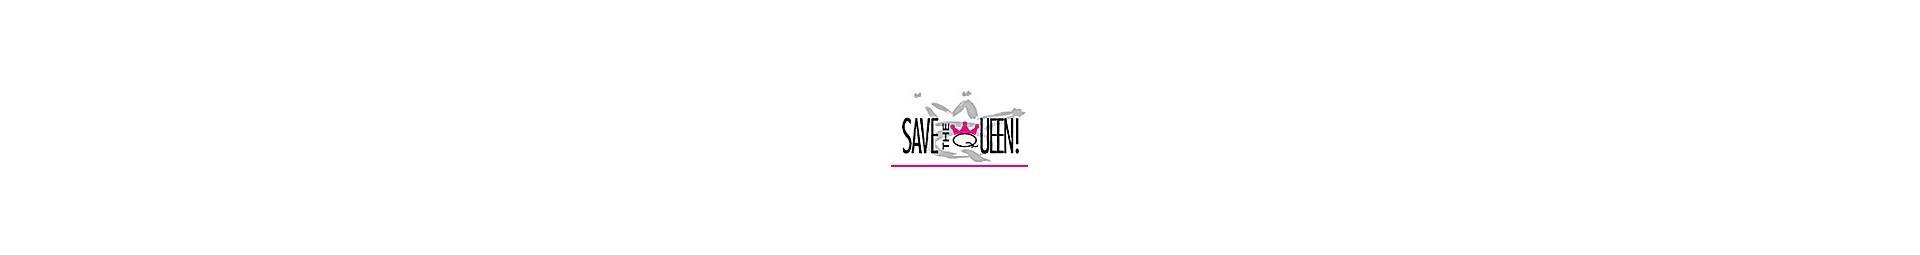 SAVE THE QUEEN